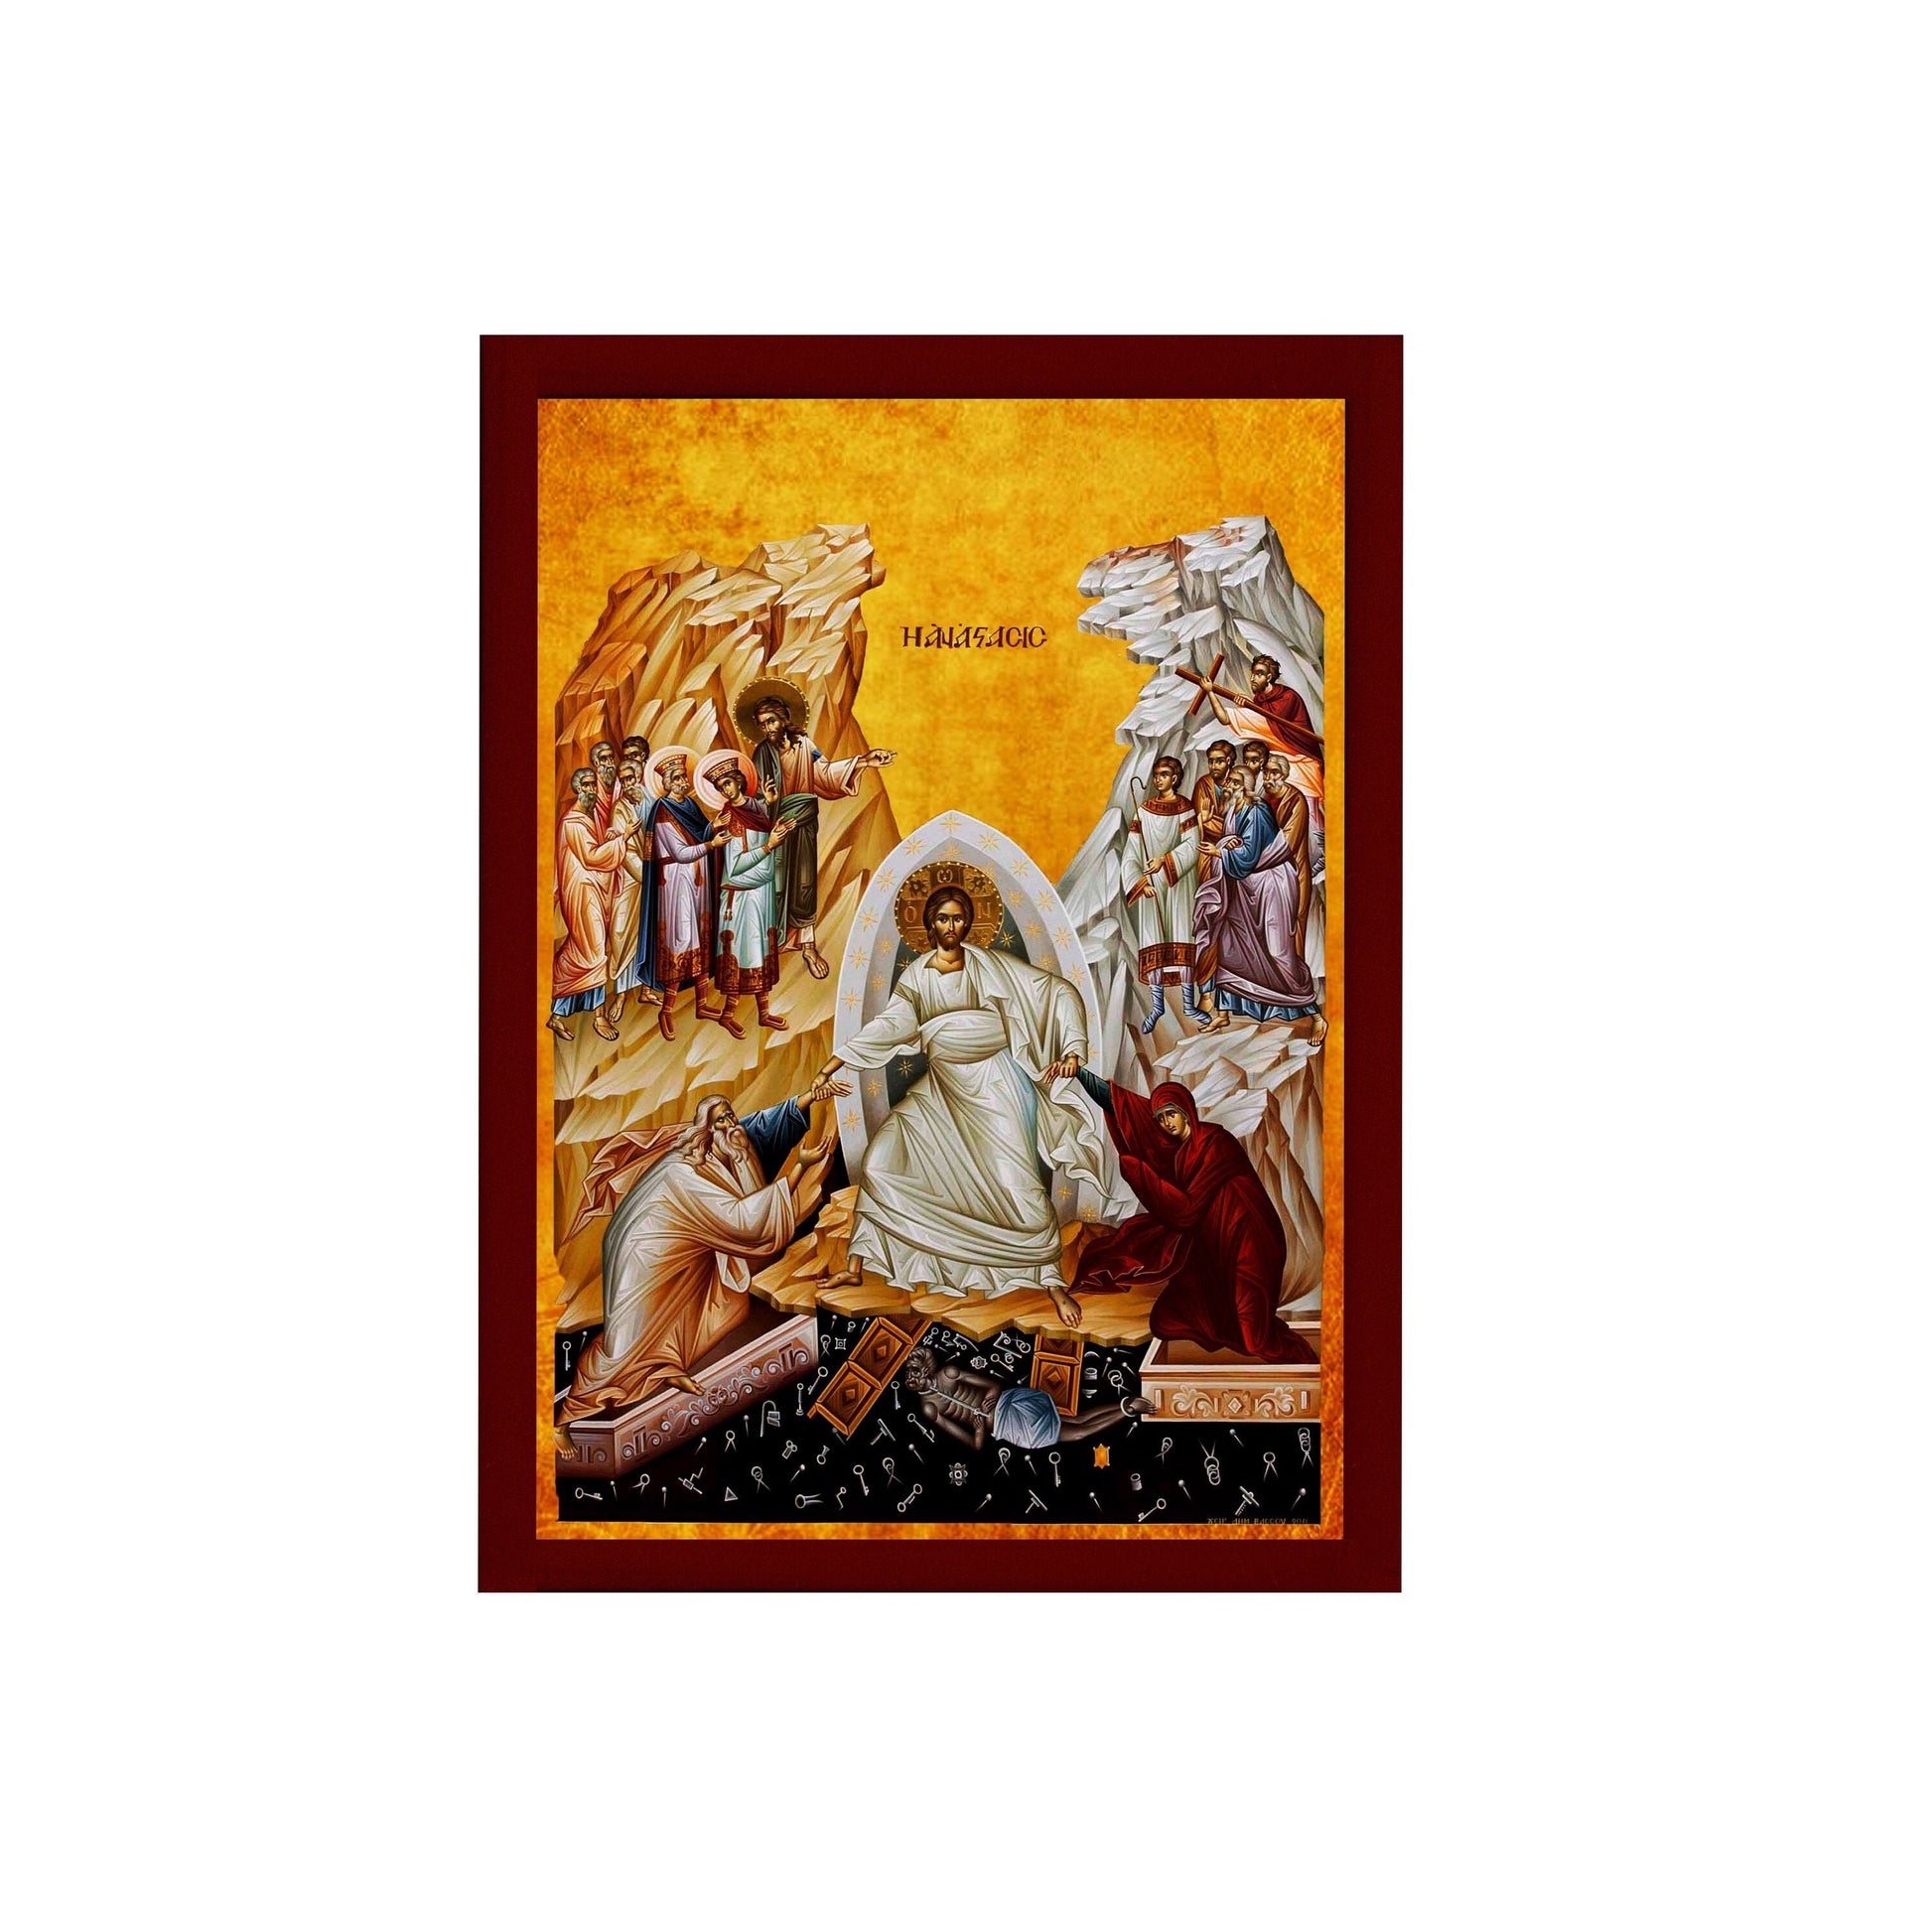 Resurrection Jesus Christ icon, Handmade Greek Orthodox icon, Byzantine art wall hanging of our Lord rising from the dead, religious decor TheHolyArt